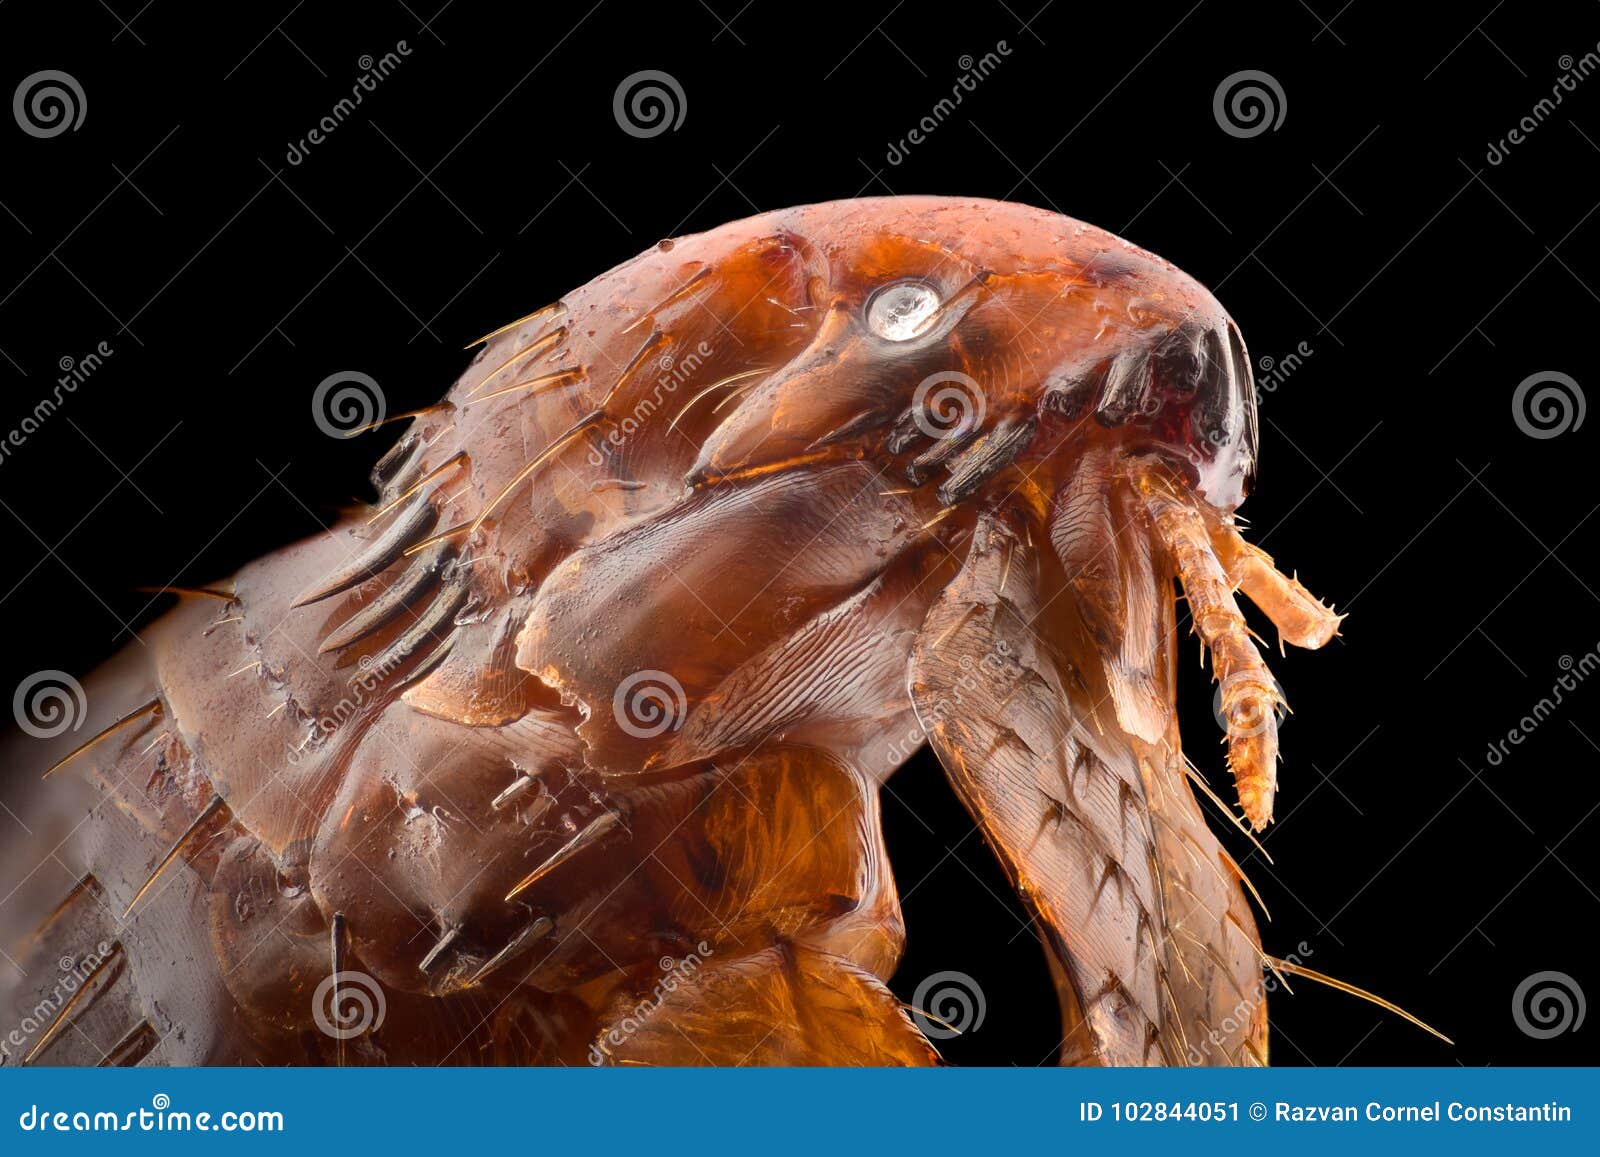 Extreme Vergroting - Vlo Stock Afbeelding Image of insect: 102844051